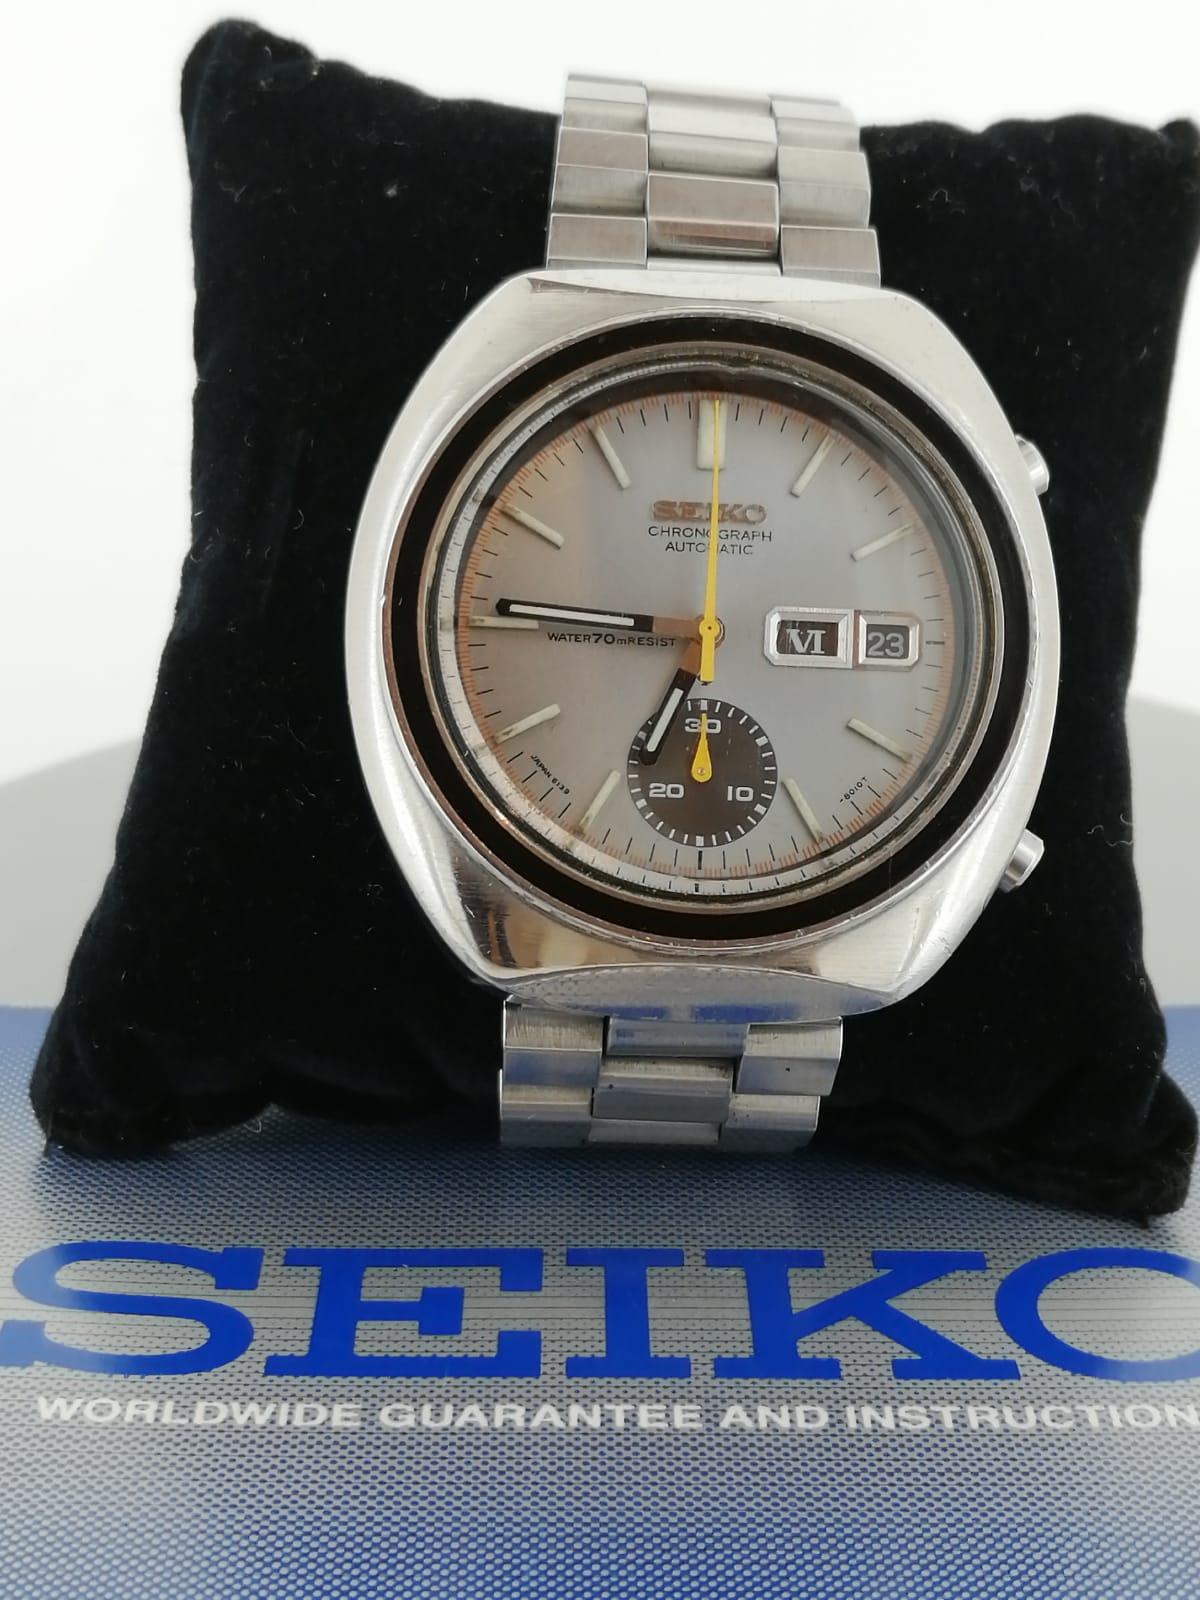 This elegant & rarely seen 
Seiko Chronograph ref 6139-8001 c1969 watch
is proud to have ALL ORIGINAL PARTS 

Despite being over 50 years old, 
the timepiece is in great condition & 
in excellent working order

~~~

This iconic timepiece features: